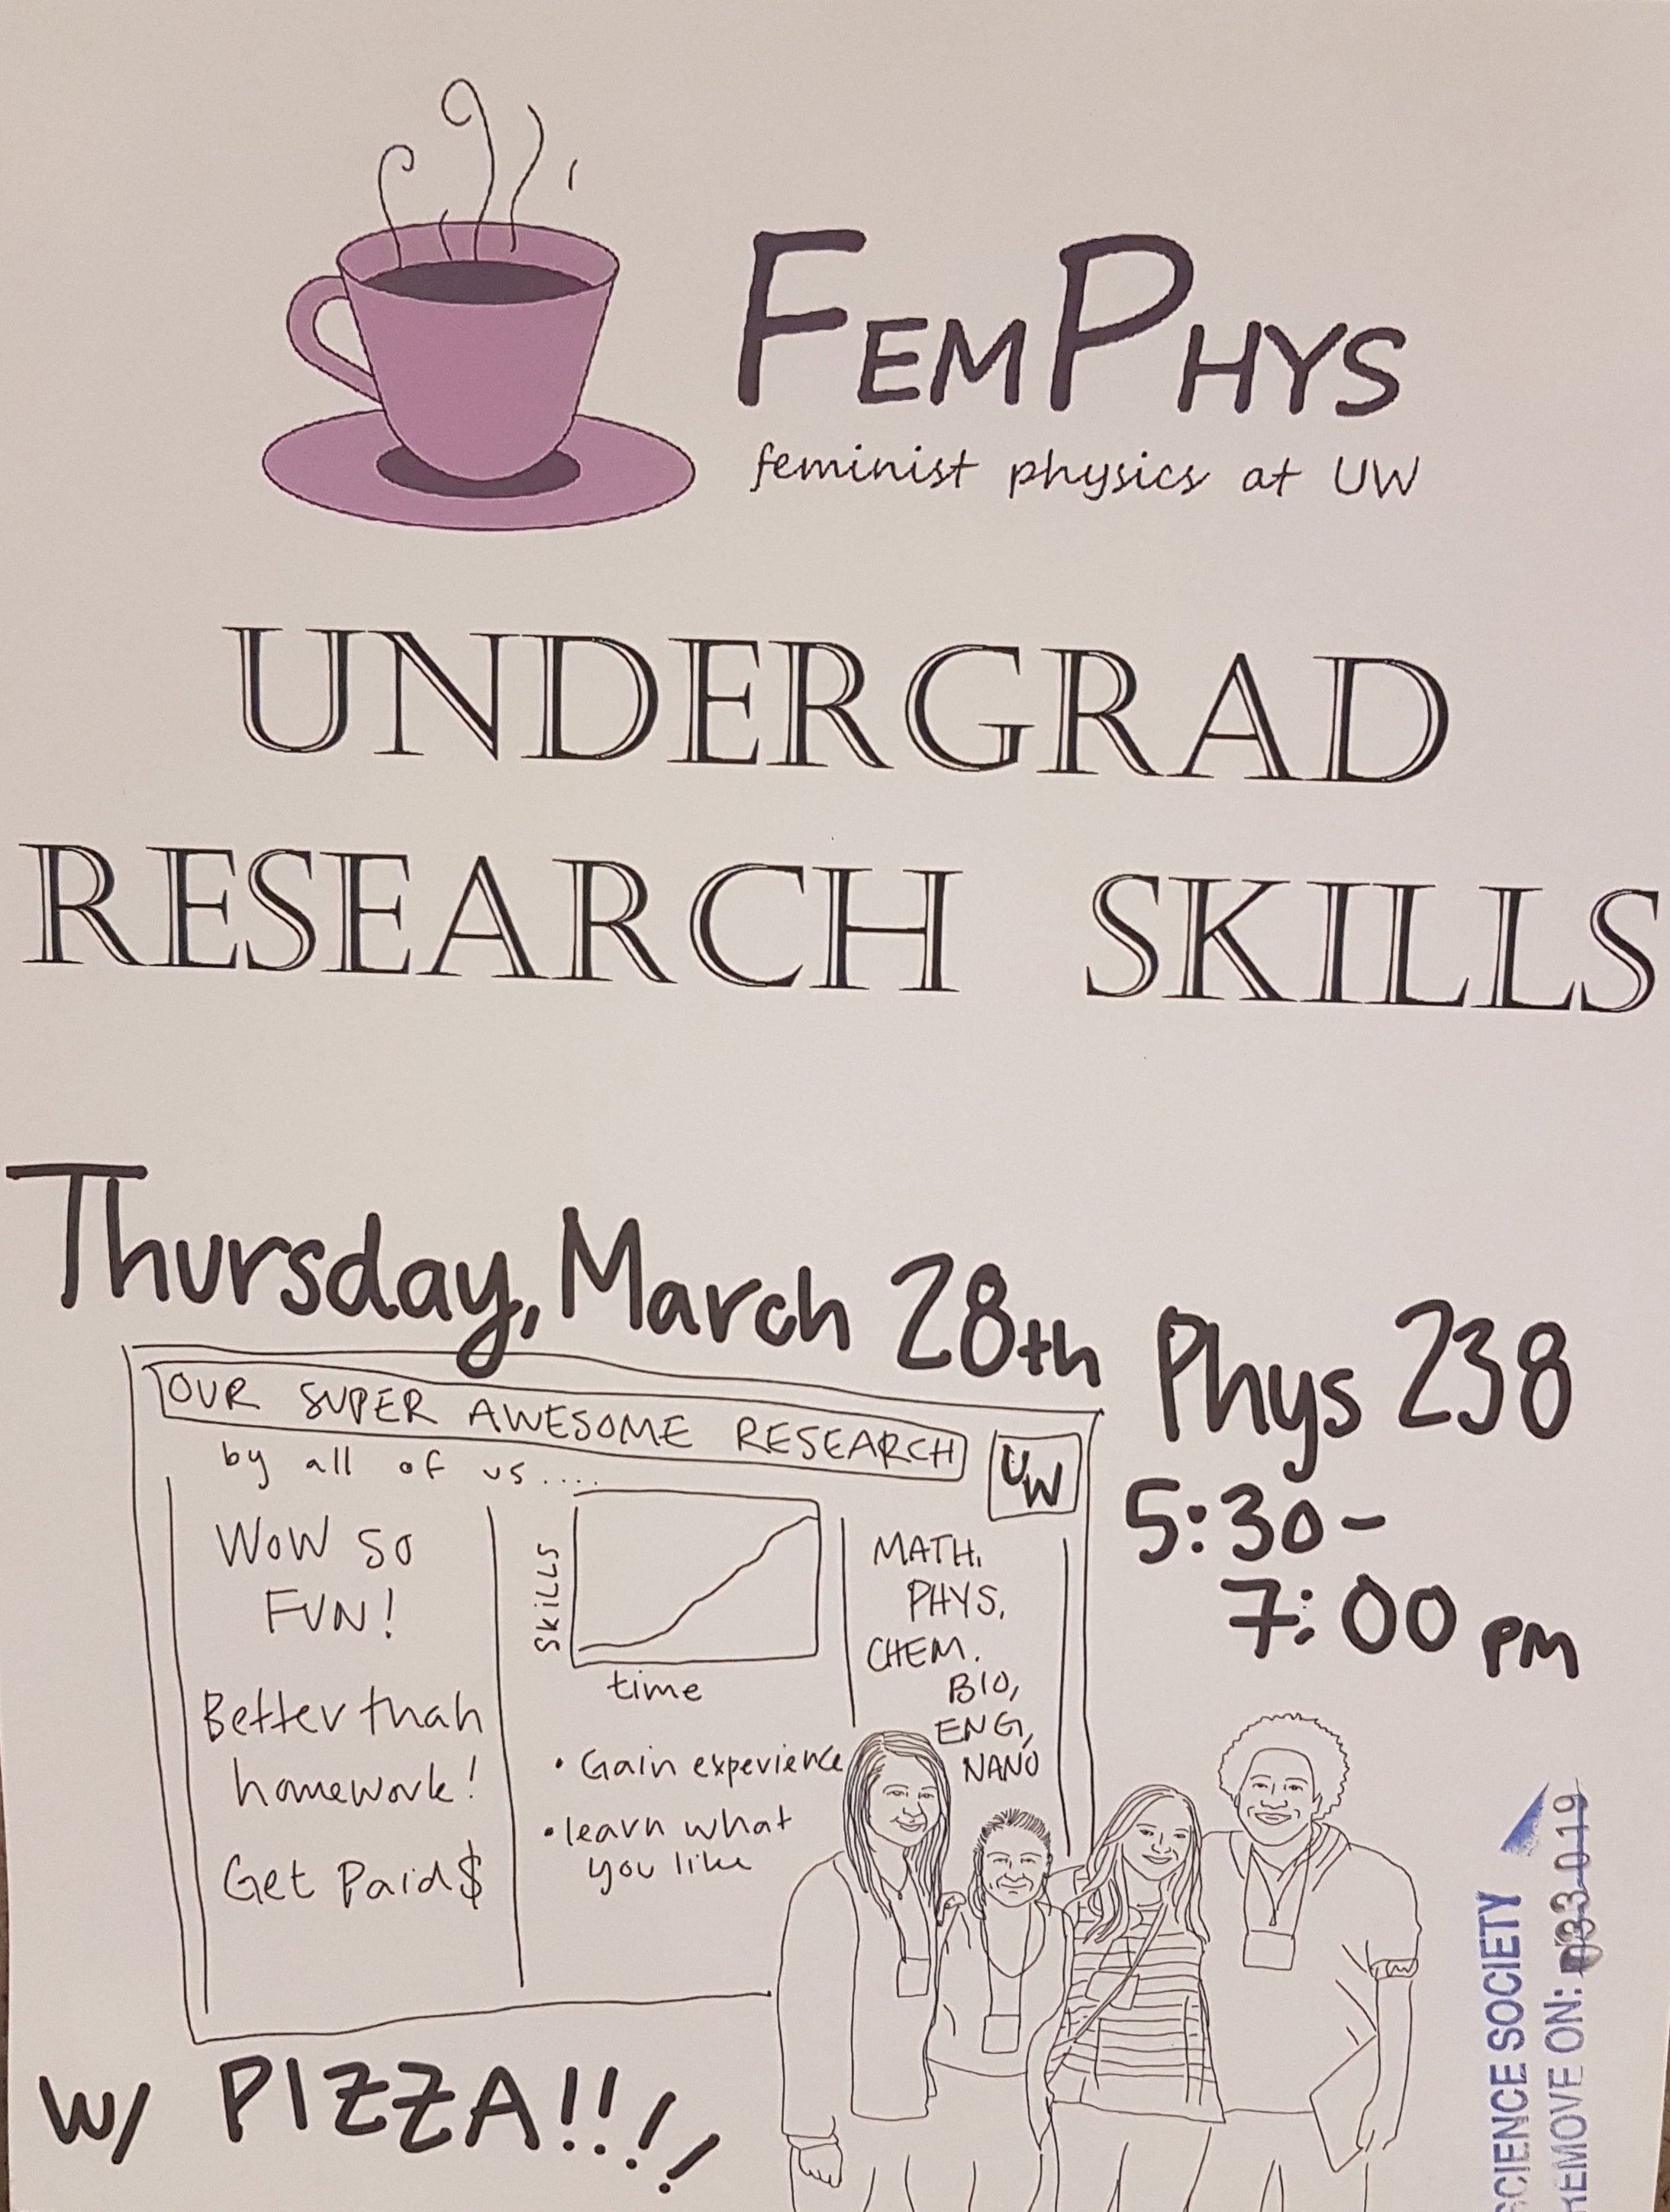 FemPhys Undergrad Research Skills March 28 5:30-7:00 pm PHYS 238